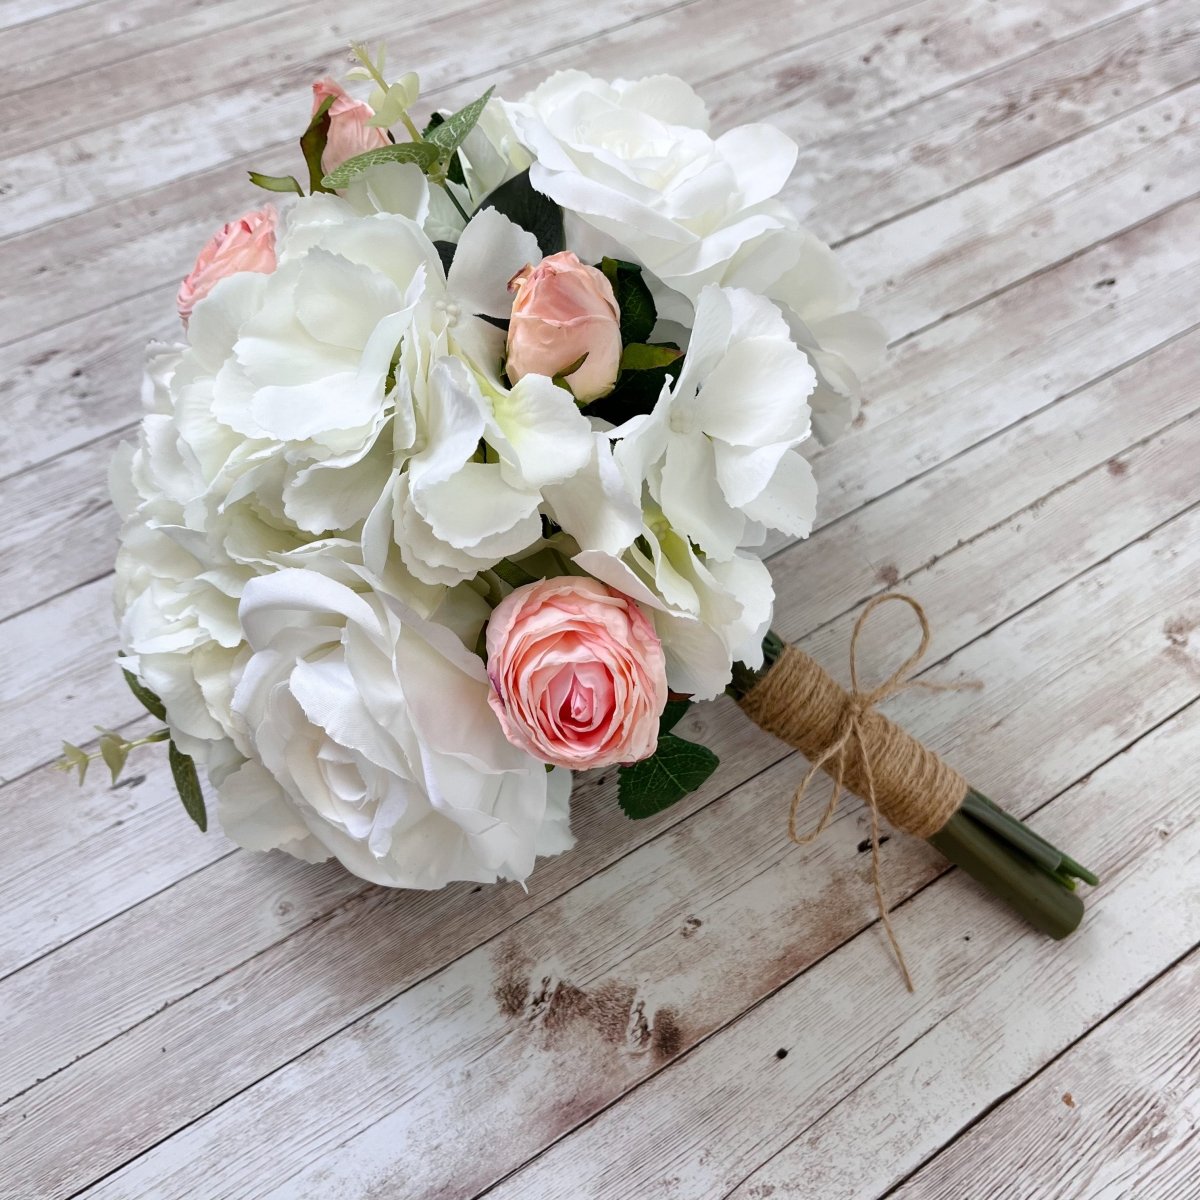 Blush Silk Wedding Bouquet - Pink and Ivory Artificial Wedding Bouquet - Hand Tied with Twine